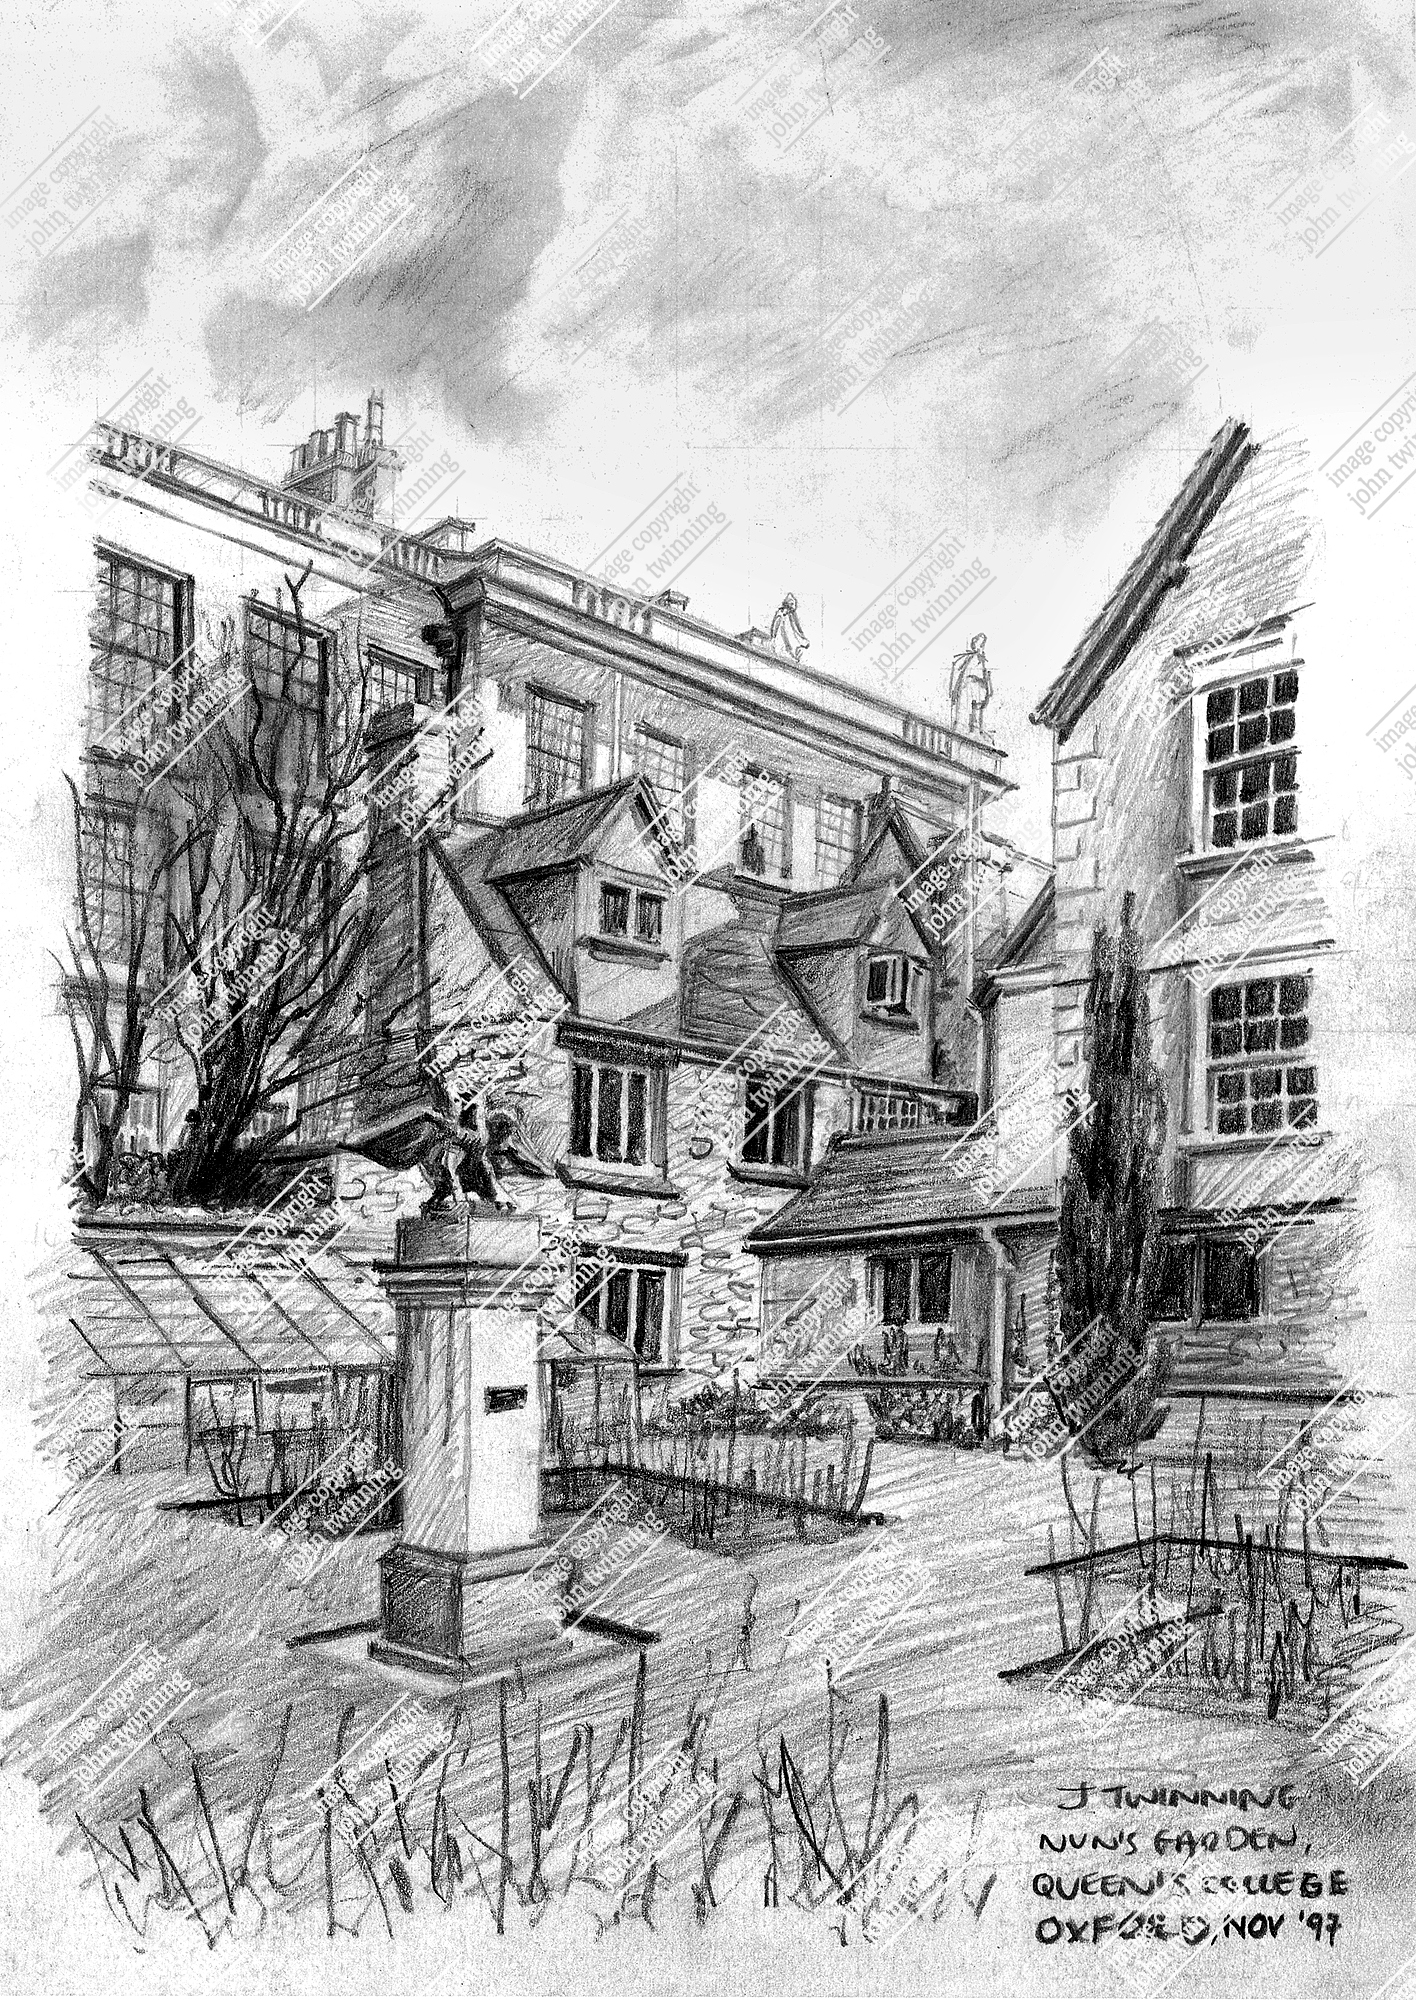 'The Nun's Garden' [portrait] - art print from a pencil drawing of this view of the queen's college, oxford